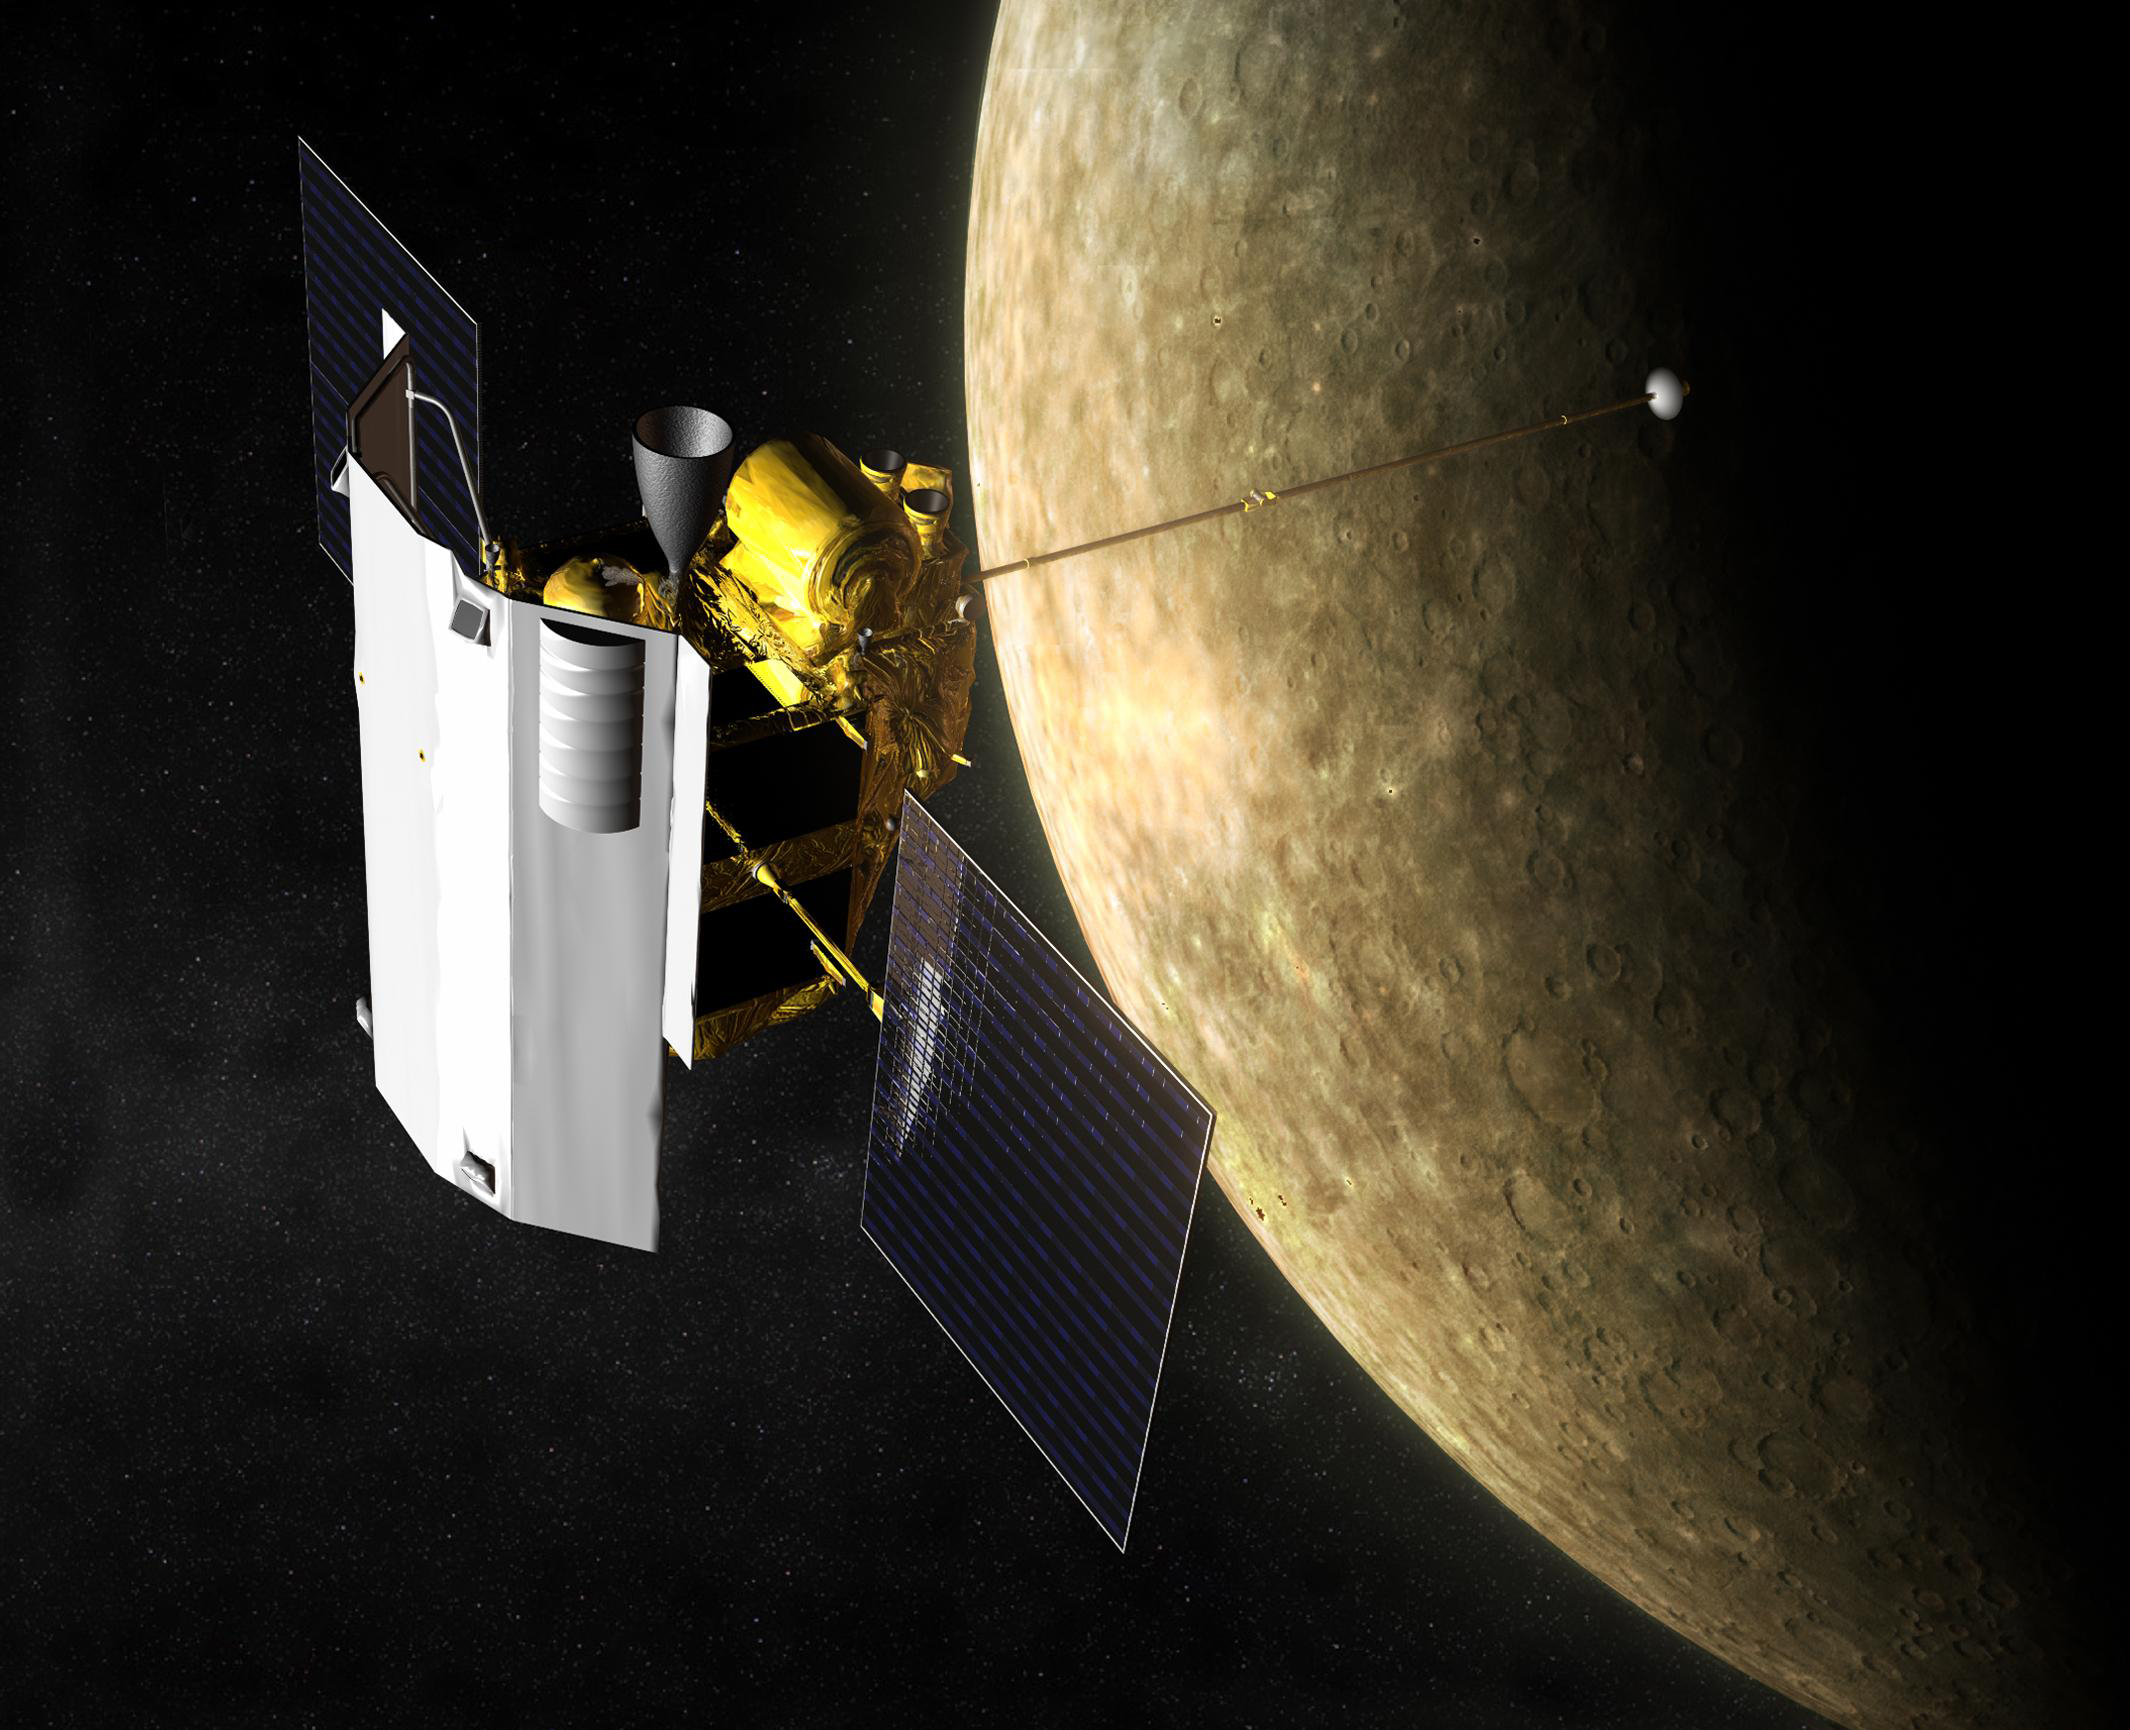 Artist’s impression of NASA’s MErcury Surface, Space ENvironment, GEochemistry, and Ranging (MESSENGER) spacecraft in orbit at Mercury